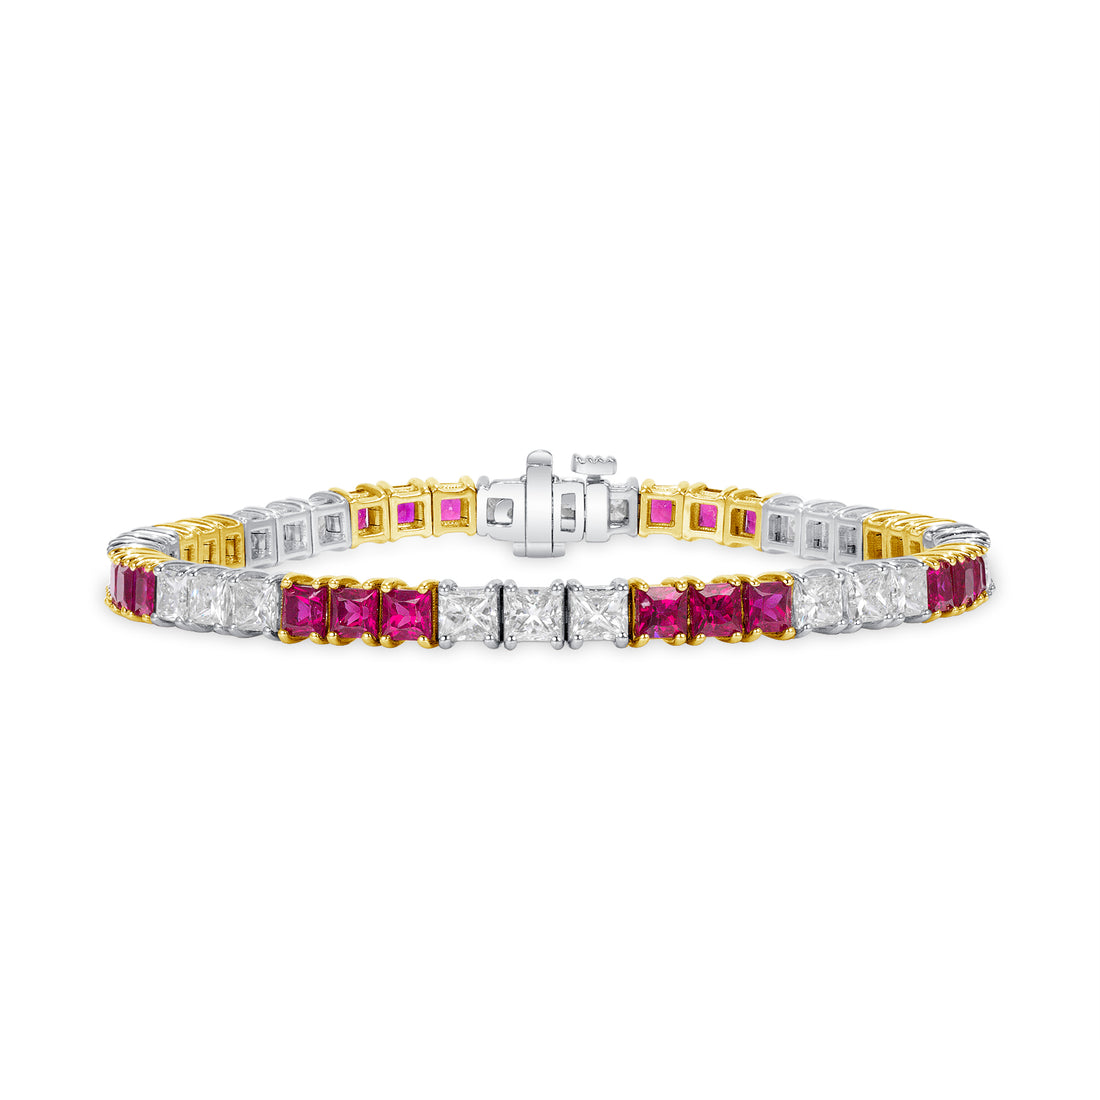 10.48 CT. Princess Cut Ruby and Diamond Tennis Bracelet in 14K White Gold and Yellow Gold